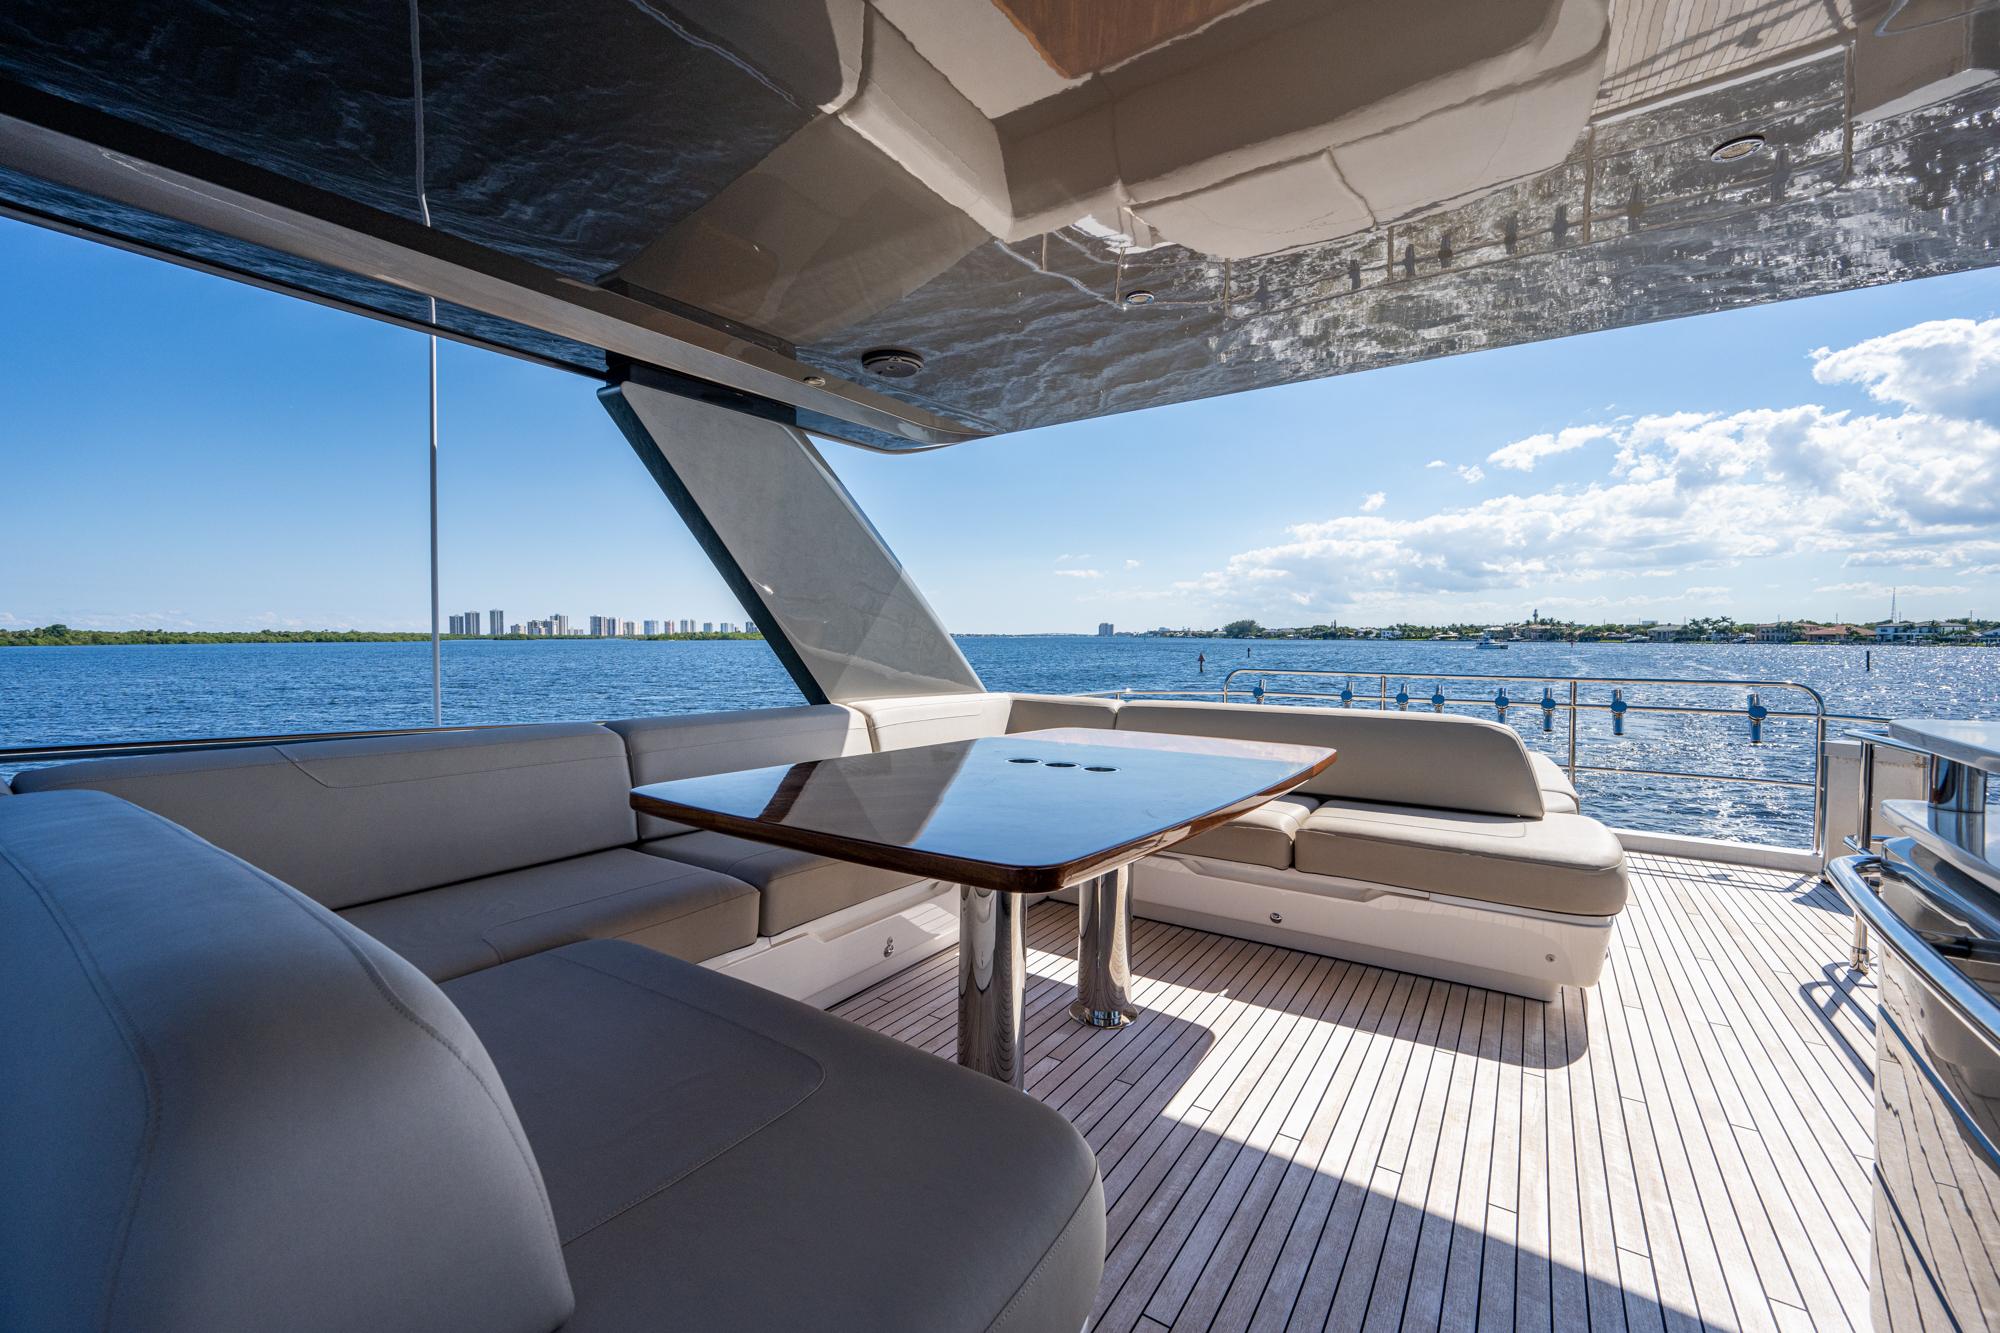 Princess 70 I Love It - Flybridge, Seating and Dinette Table